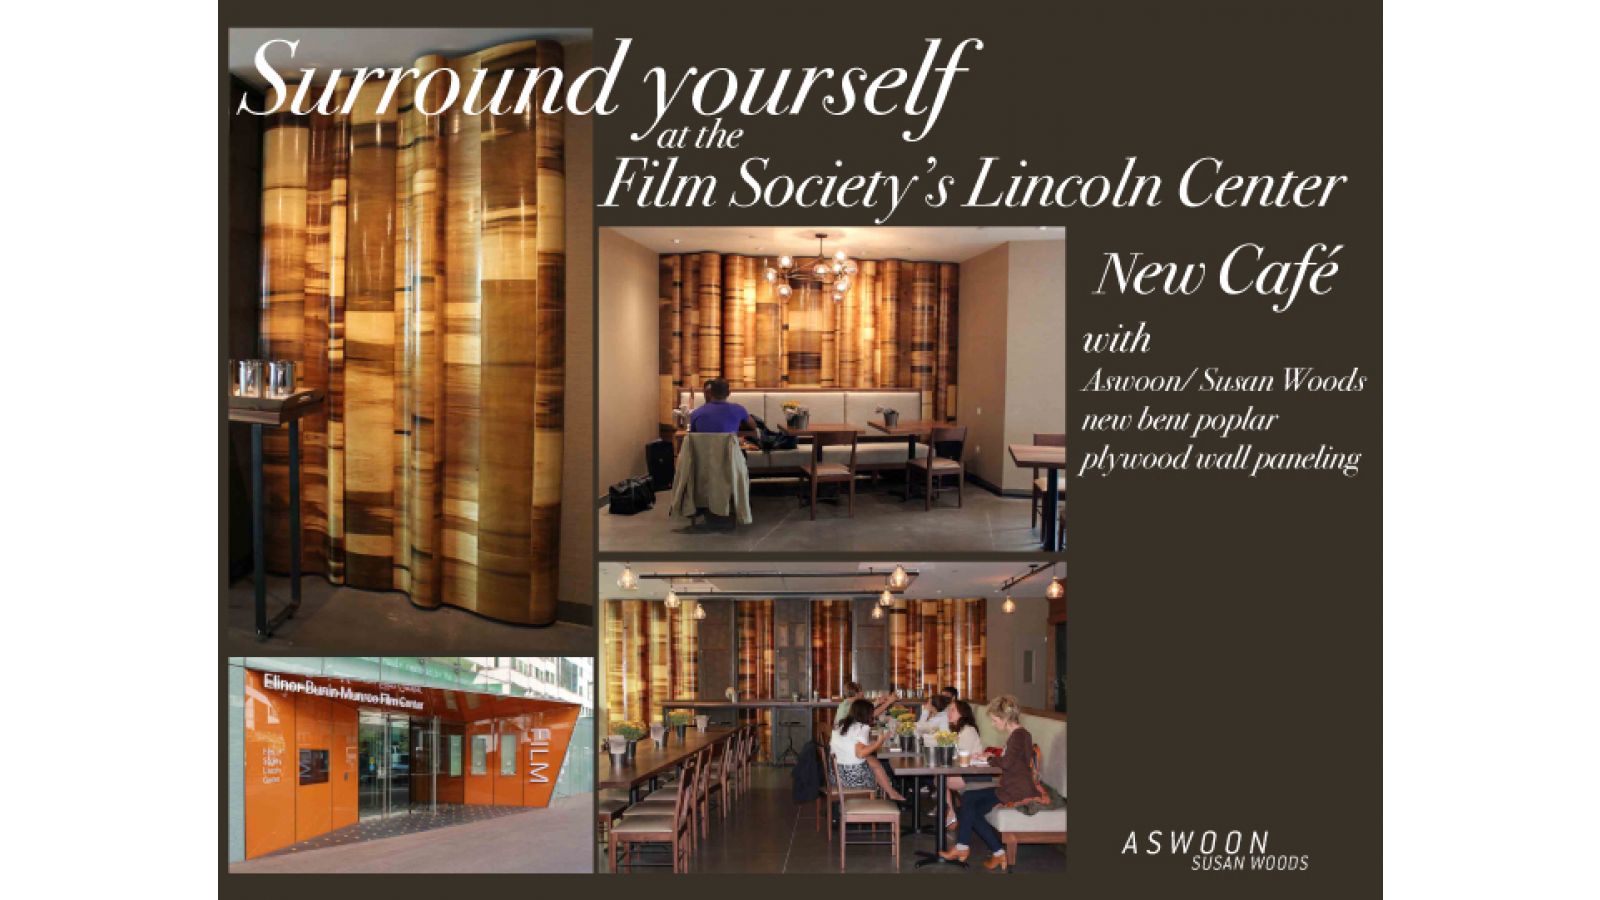 Lincoln Center Film Society Cafe Wall Finish